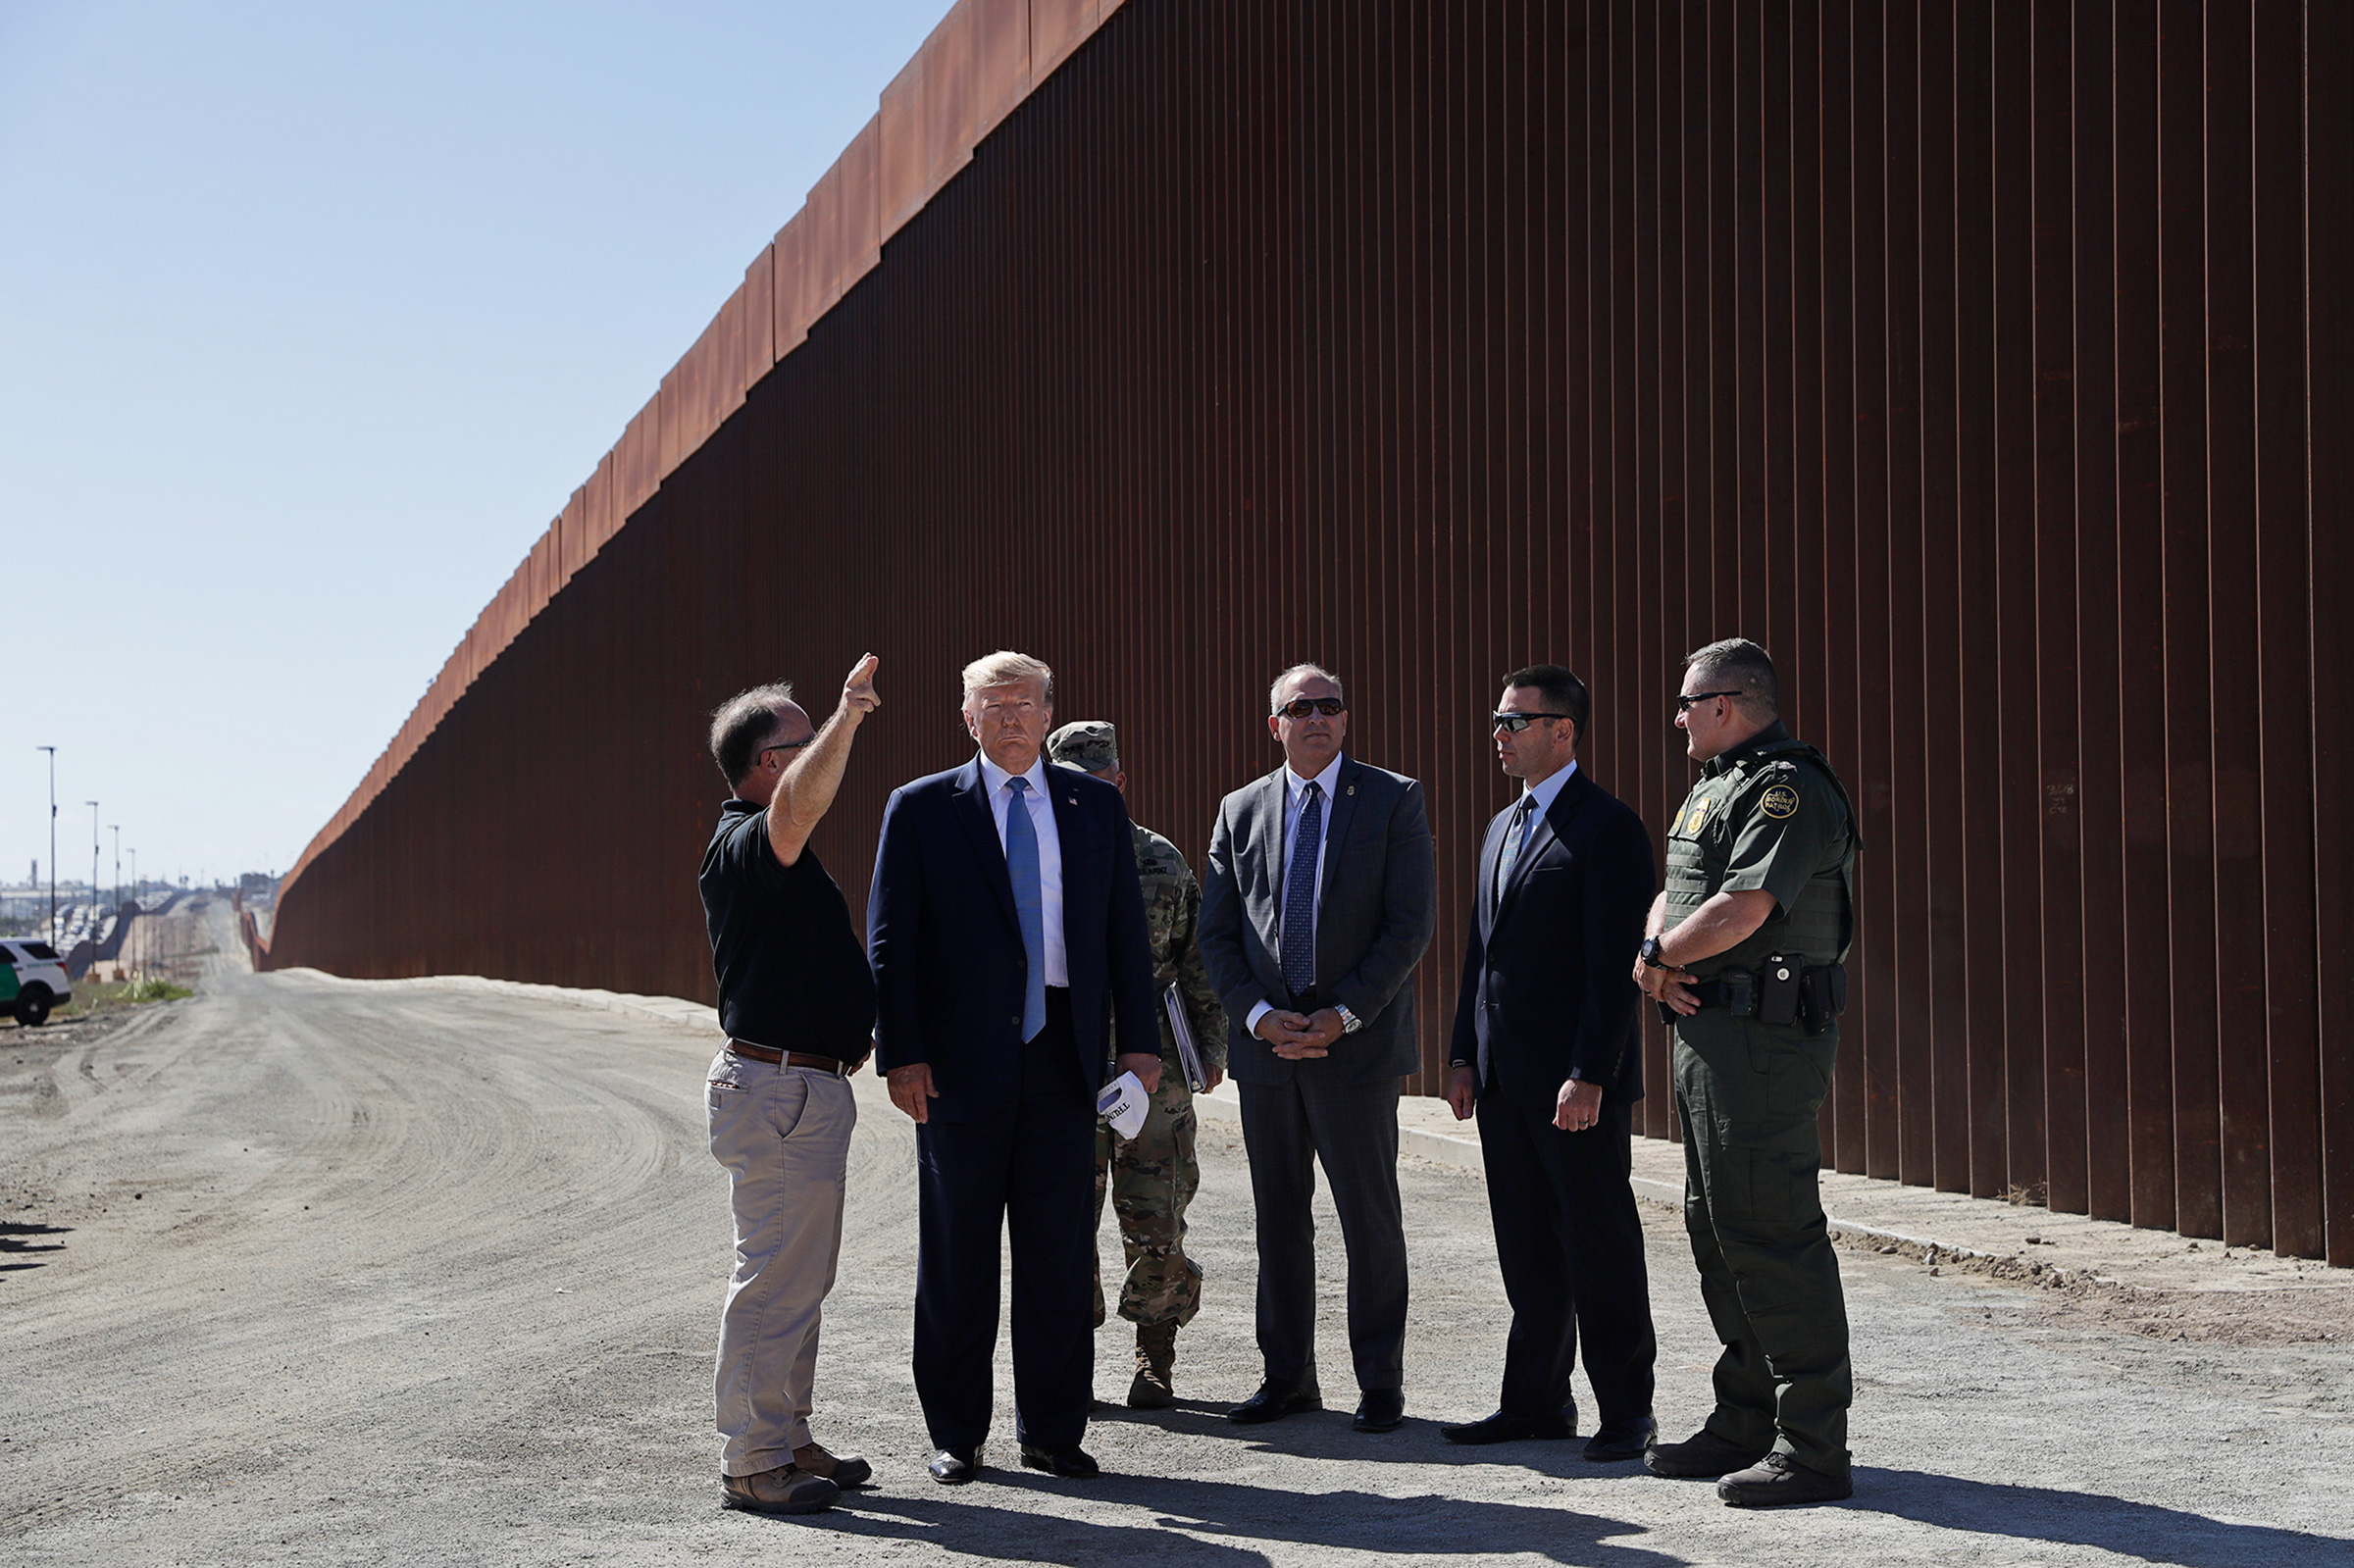 Trump tours a section of the border wall in Otay Mesa, Calif., on Sept. 18, 2019